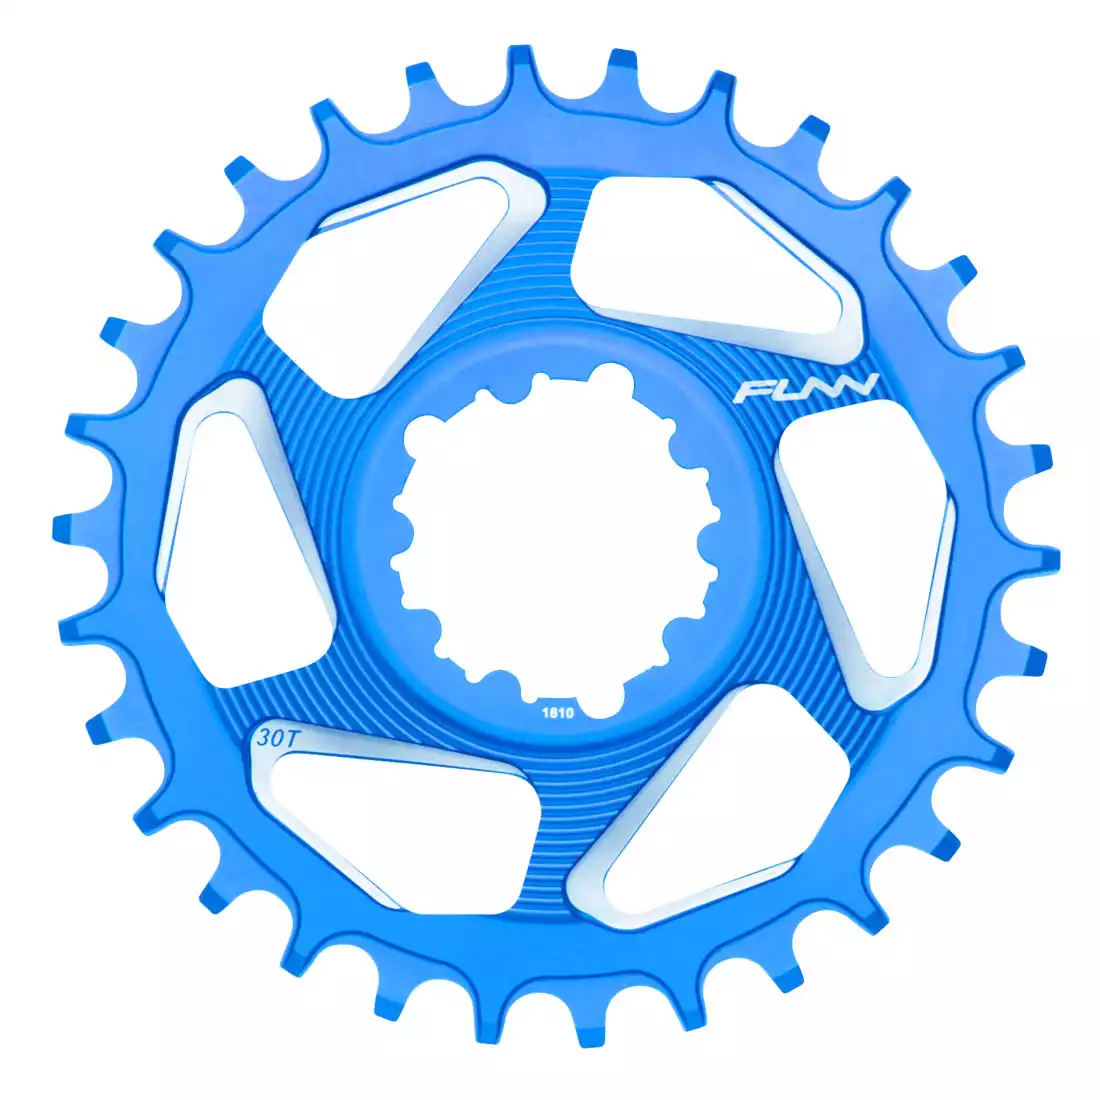 FUNN SOLO DX NARROW-WIDE BOOST 30T blue sprocket for bicycle crank